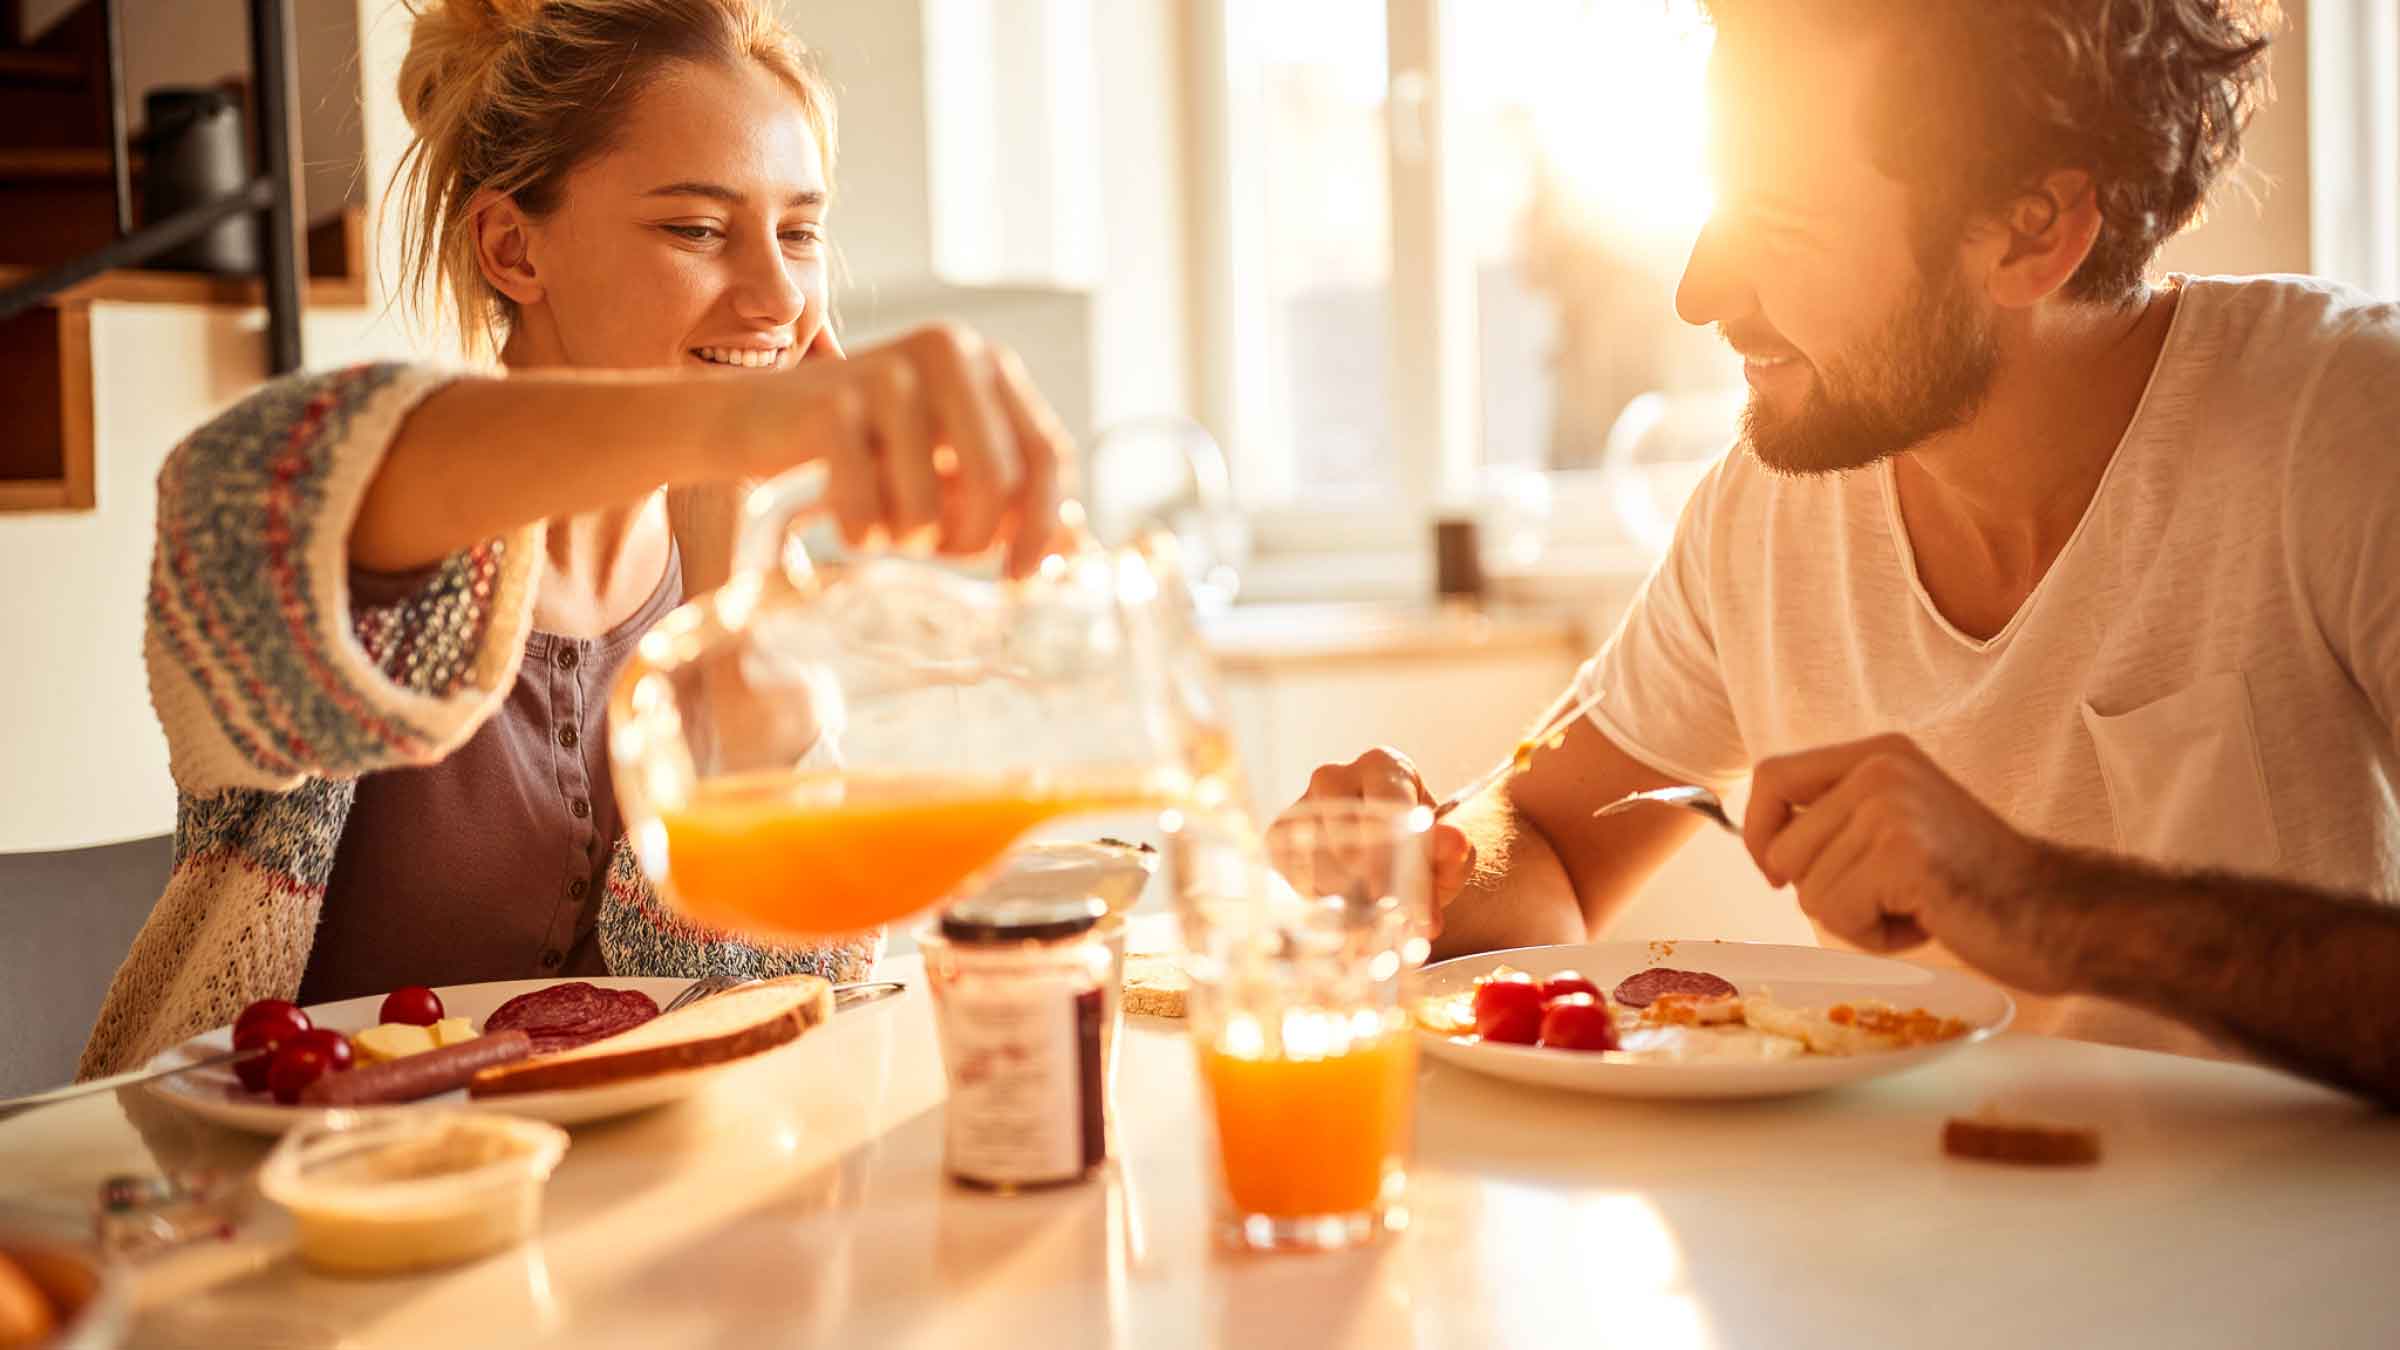 Young couple at breakfast table, the woman is pouring orange juice from a jug into her partners glass. The sun is shining brightly through the large window in the background.